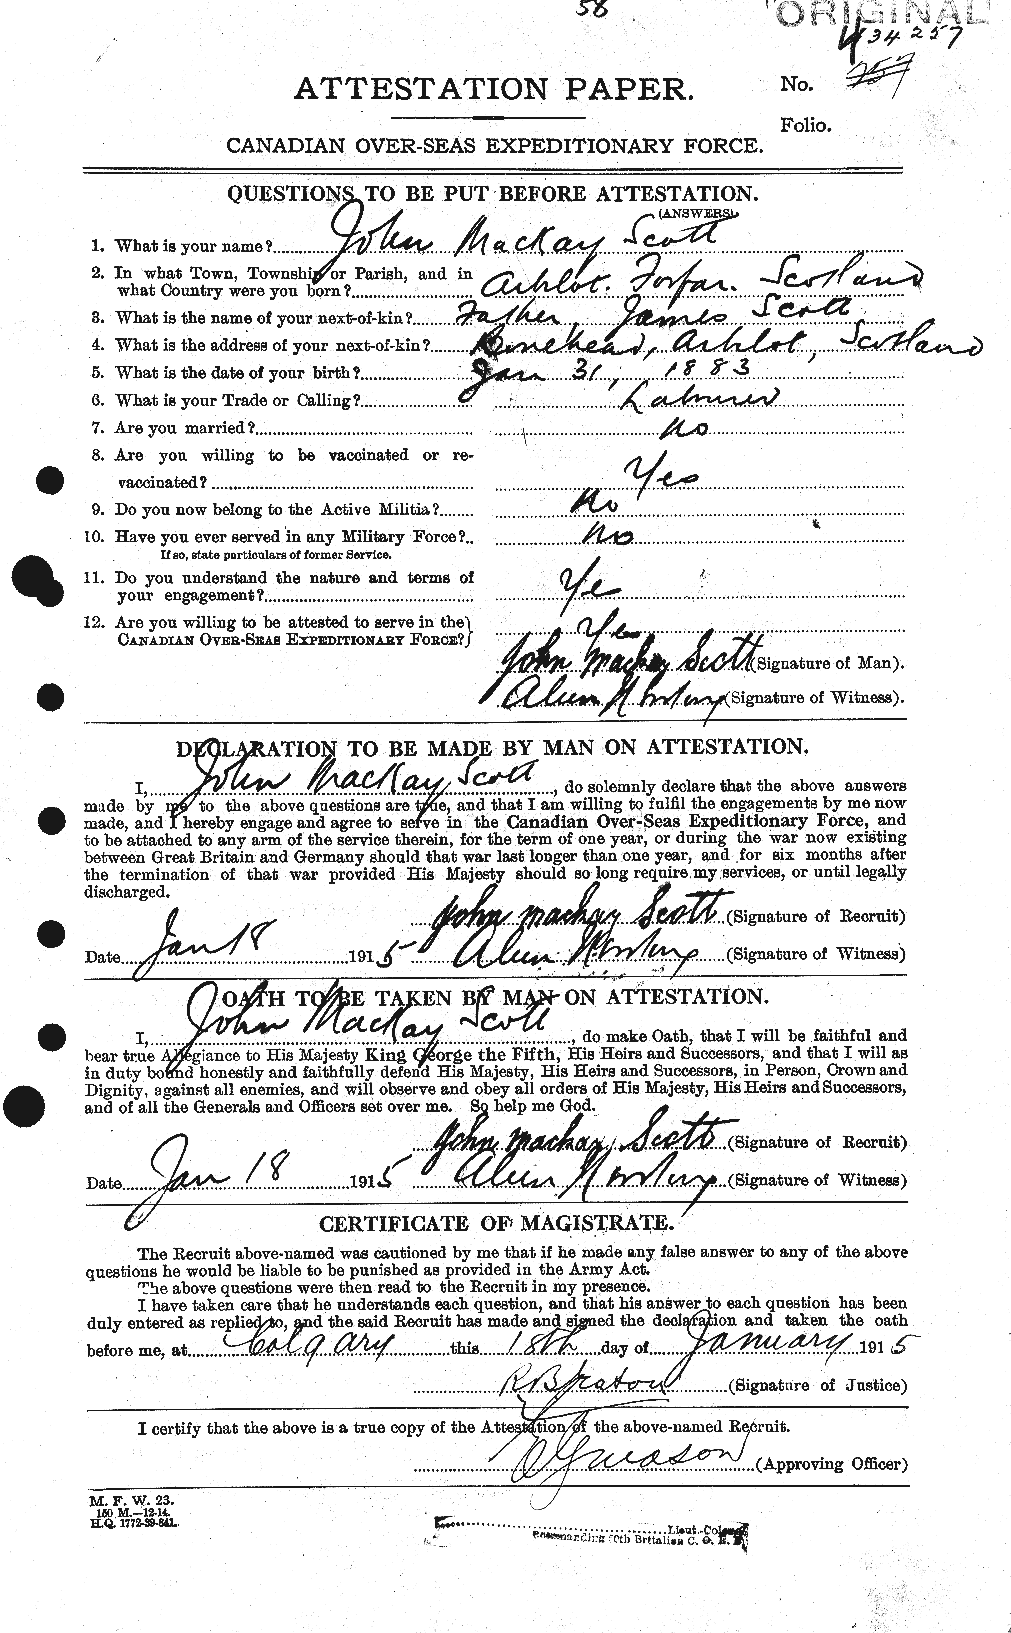 Personnel Records of the First World War - CEF 084444a